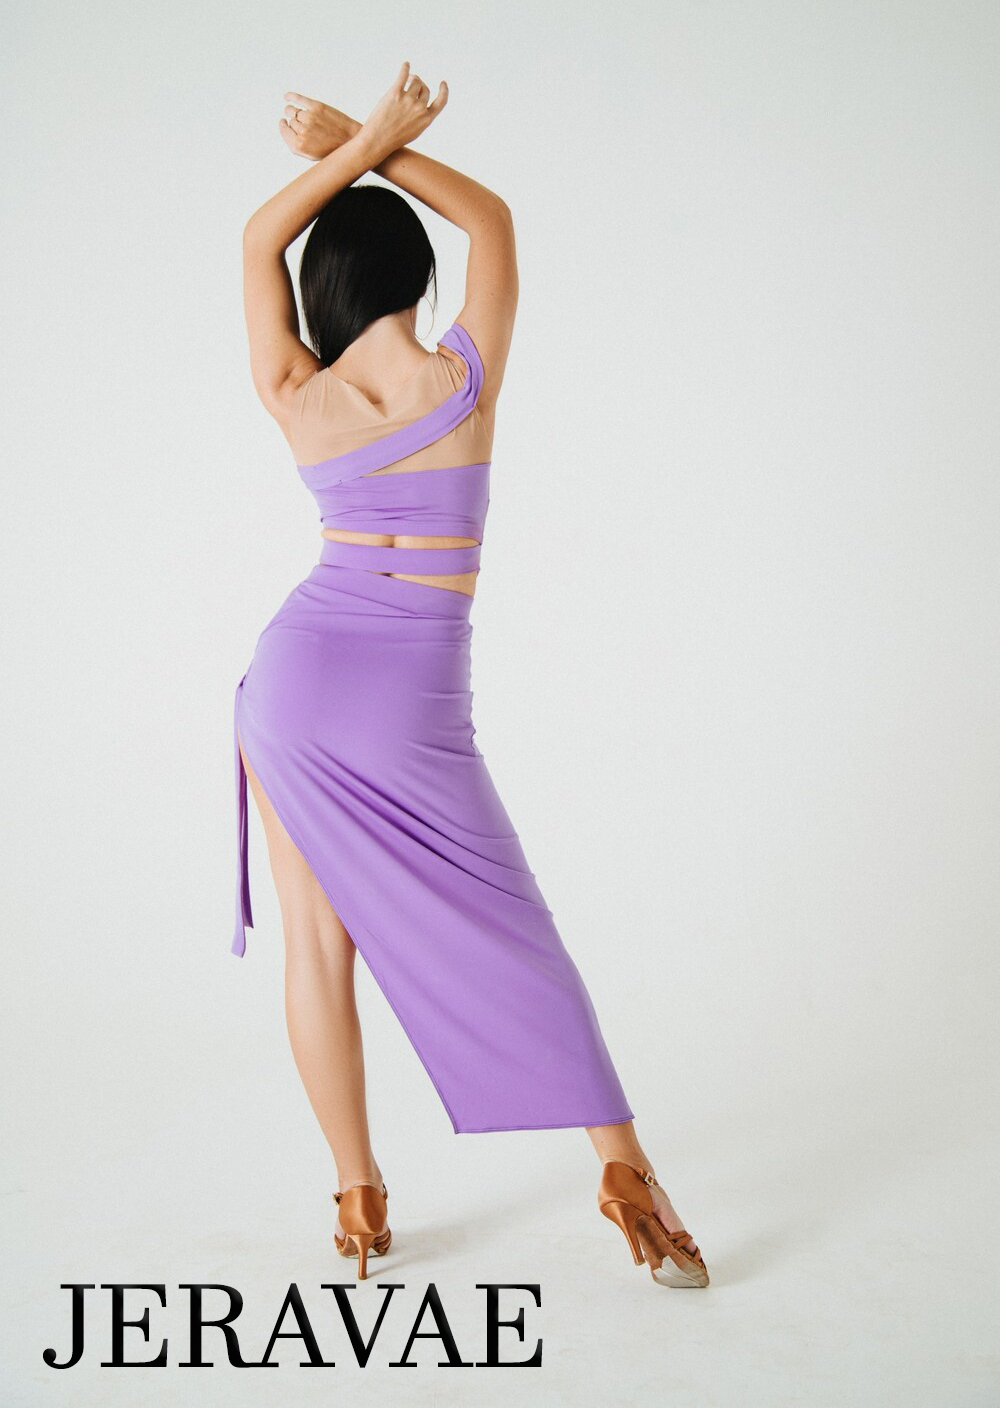 Sirius Practice Dance Wear Sleeveless Latin Crop Top with Nude Mesh Illusion Neckline Available in Violet and Black PRA 845 In Stock